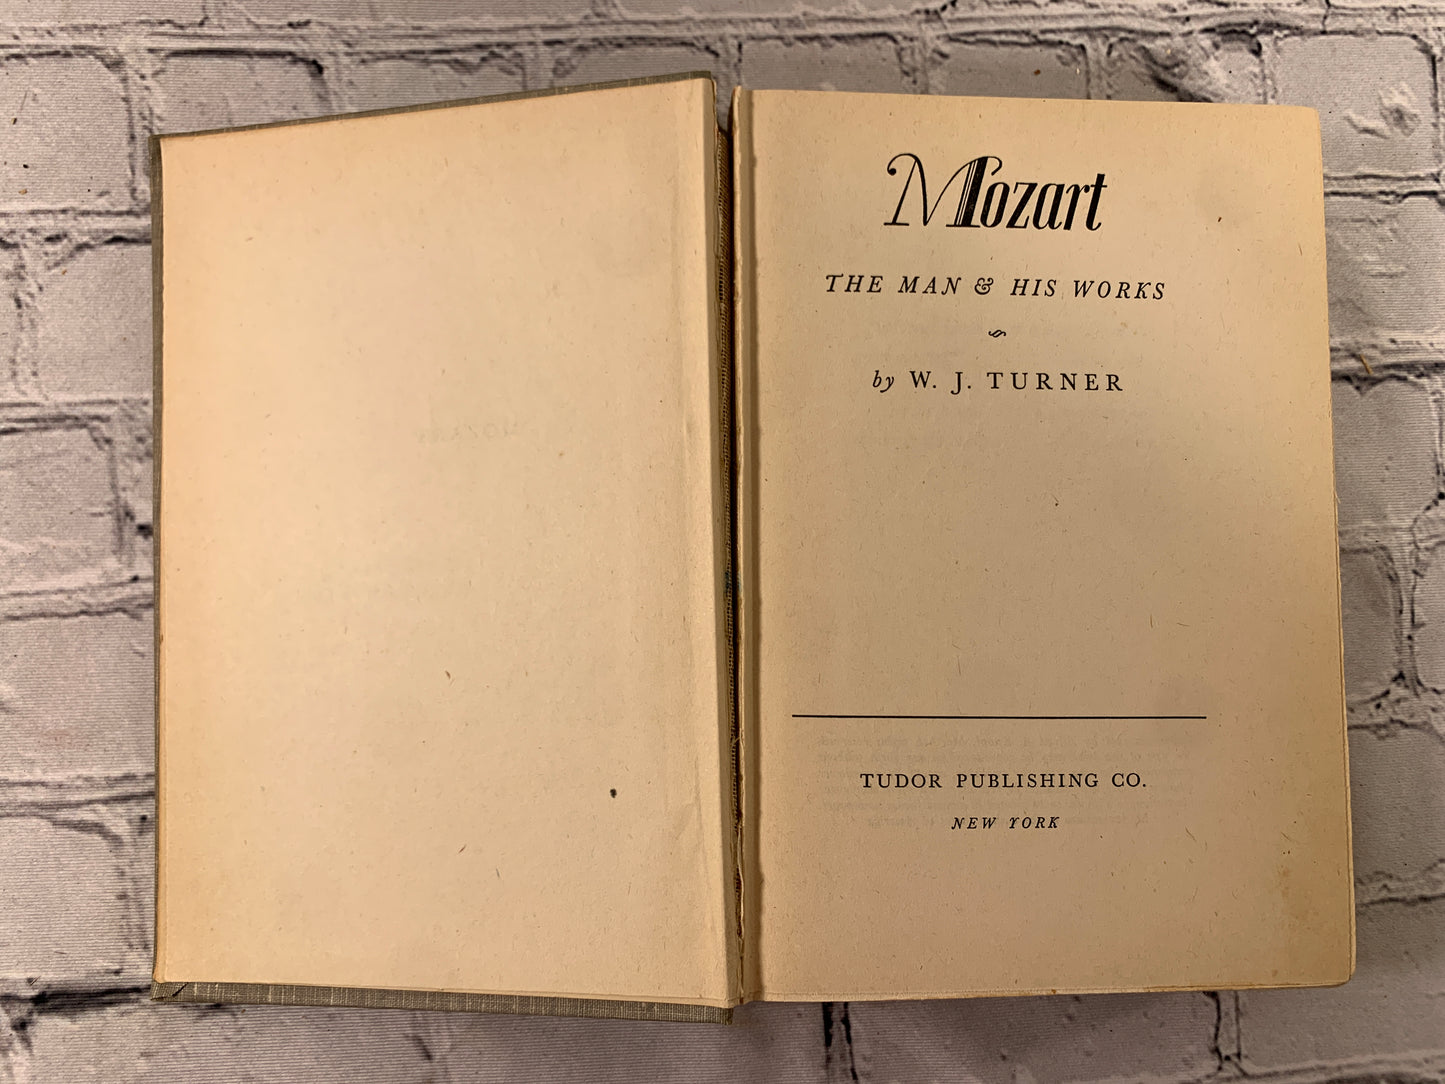 Mozart: The Man & His Works by W.J. Turner [1938]